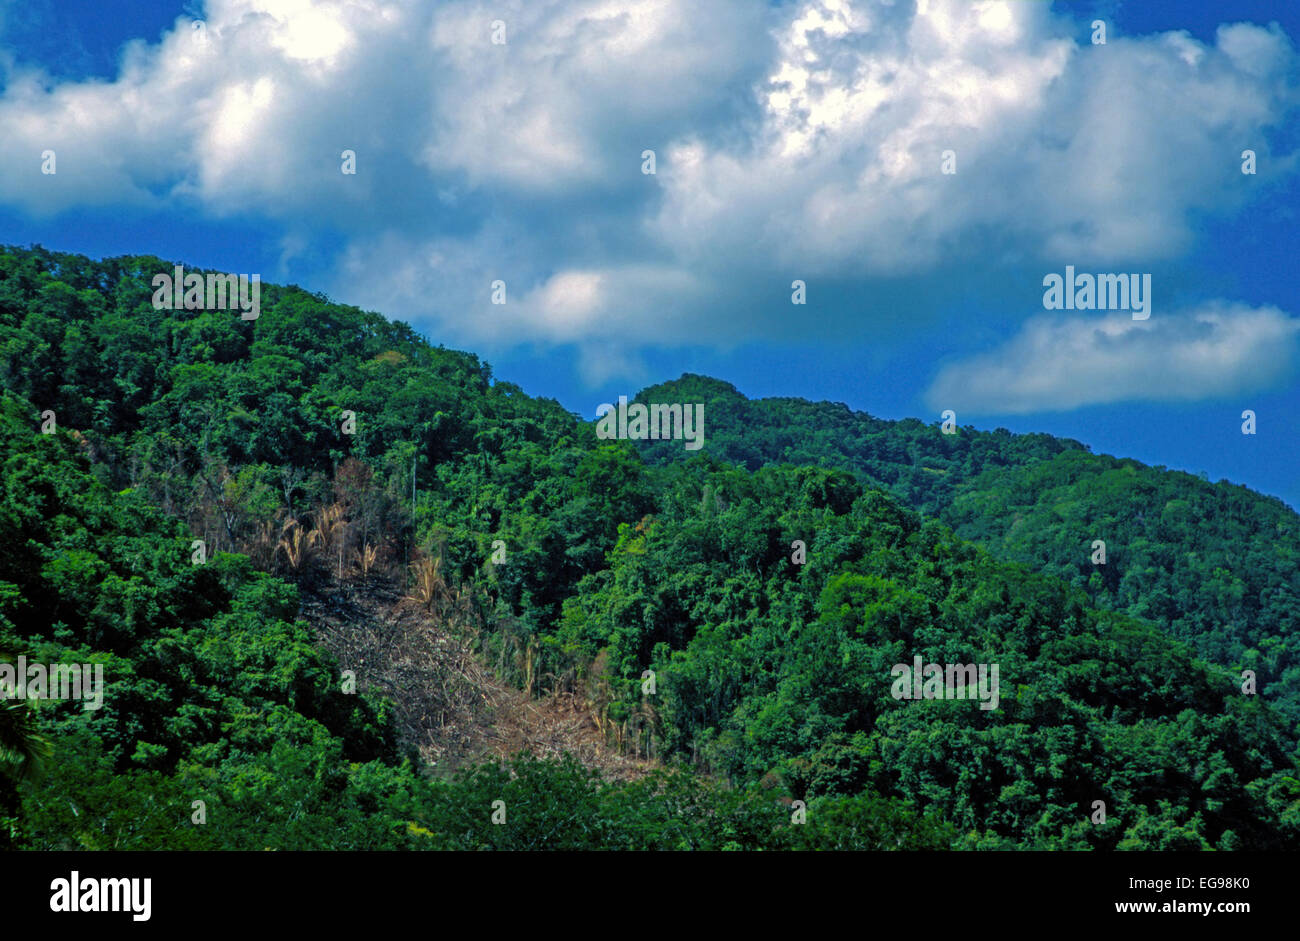 Shifting cultivation on a steep slope in Central America. This field was recently converted from tropical rainforest to agricultural land. Stock Photo